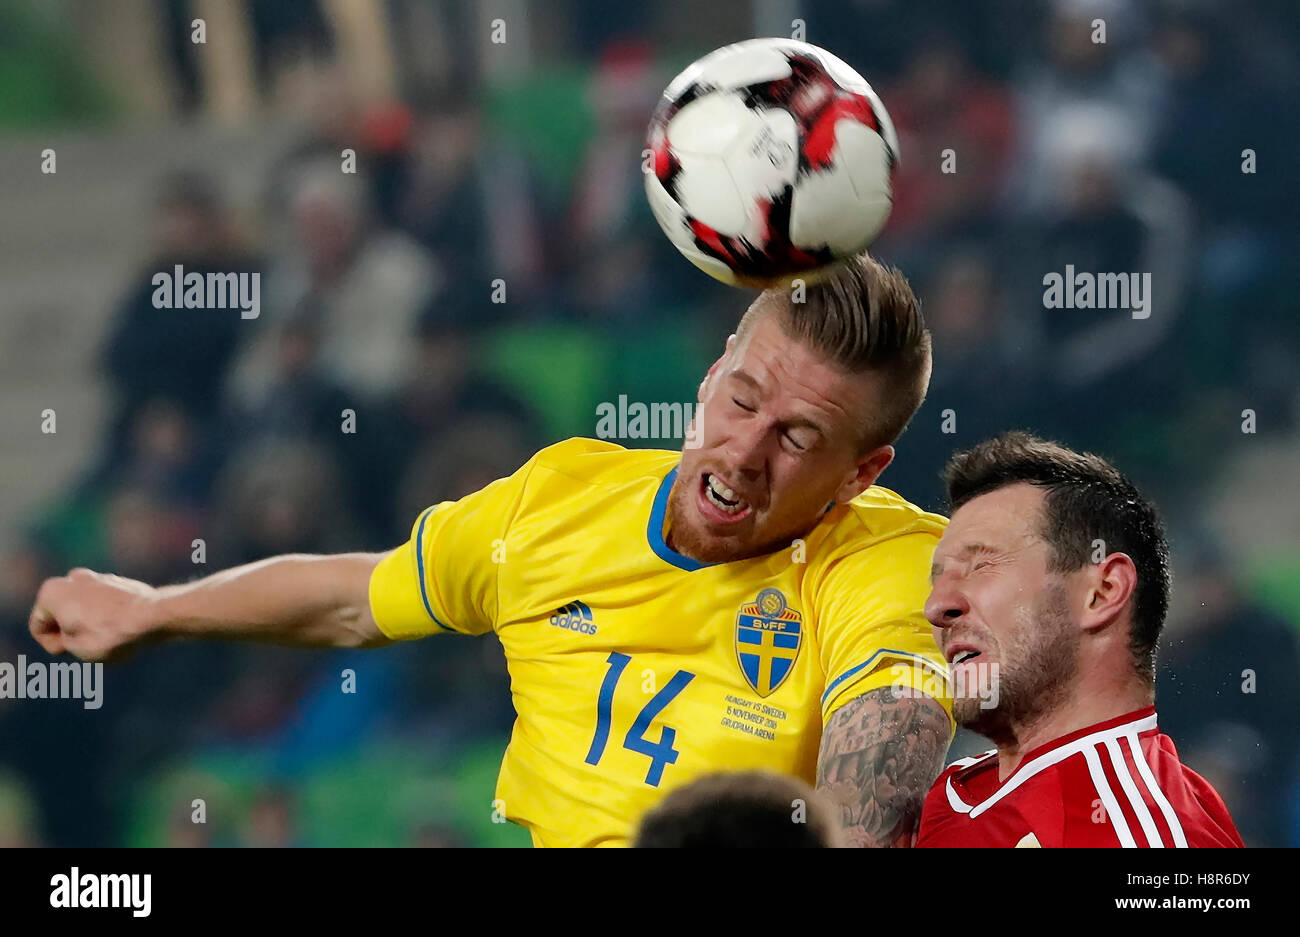 Budapest, Hungary. 15th November, 2016. Akos Elek (R) of Hungary battles for the ball in the air with Pontus Jansson #14 of Sweden during the International Friendly match between Hungary and Sweden at Groupama Arena on November 15, 2016 in Budapest, Hungary. Credit:  Laszlo Szirtesi/Alamy Live News Stock Photo